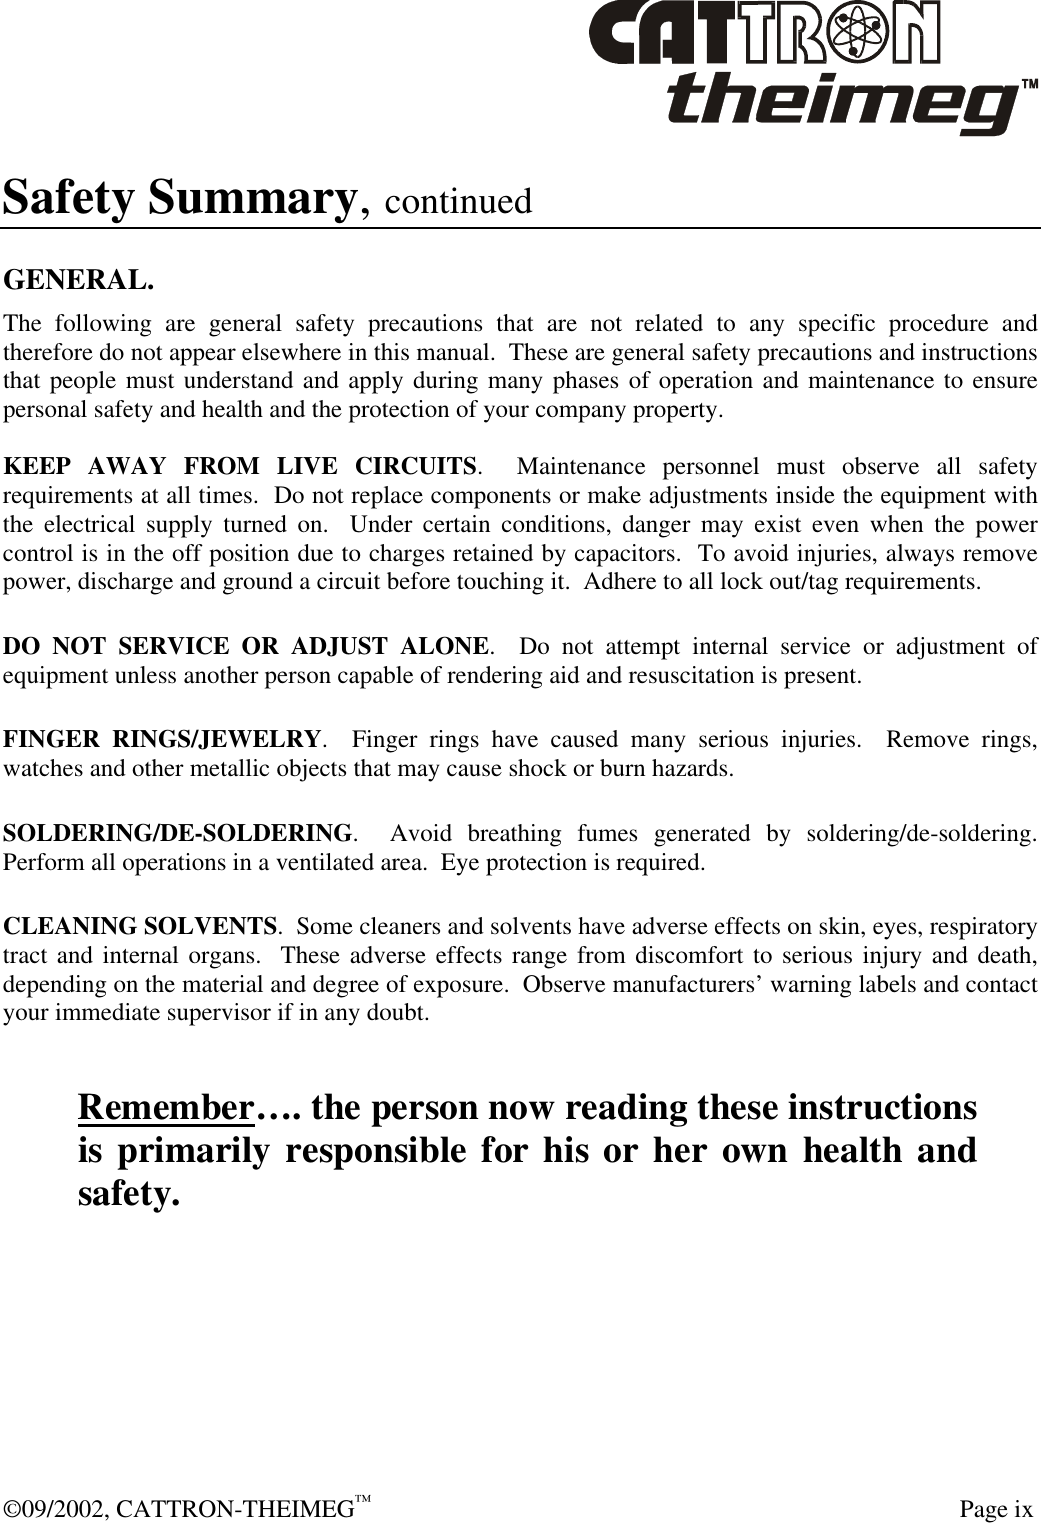  ©09/2002, CATTRON-THEIMEG™   Page ix Safety Summary, continued  GENERAL. The following are general safety precautions that are not related to any specific procedure and therefore do not appear elsewhere in this manual.  These are general safety precautions and instructions that people must understand and apply during many phases of operation and maintenance to ensure personal safety and health and the protection of your company property.  KEEP AWAY FROM LIVE CIRCUITS.  Maintenance personnel must observe all safety requirements at all times.  Do not replace components or make adjustments inside the equipment with the electrical supply turned on.  Under certain conditions, danger may exist even when the power control is in the off position due to charges retained by capacitors.  To avoid injuries, always remove power, discharge and ground a circuit before touching it.  Adhere to all lock out/tag requirements.   DO NOT SERVICE OR ADJUST ALONE.  Do not attempt internal service or adjustment of equipment unless another person capable of rendering aid and resuscitation is present.   FINGER RINGS/JEWELRY.  Finger rings have caused many serious injuries.  Remove rings, watches and other metallic objects that may cause shock or burn hazards.     SOLDERING/DE-SOLDERING.  Avoid breathing fumes generated by soldering/de-soldering. Perform all operations in a ventilated area.  Eye protection is required.   CLEANING SOLVENTS.  Some cleaners and solvents have adverse effects on skin, eyes, respiratory tract and internal organs.  These adverse effects range from discomfort to serious injury and death, depending on the material and degree of exposure.  Observe manufacturers’ warning labels and contact your immediate supervisor if in any doubt.   Remember…. the person now reading these instructions is primarily responsible for his or her own health and safety. 